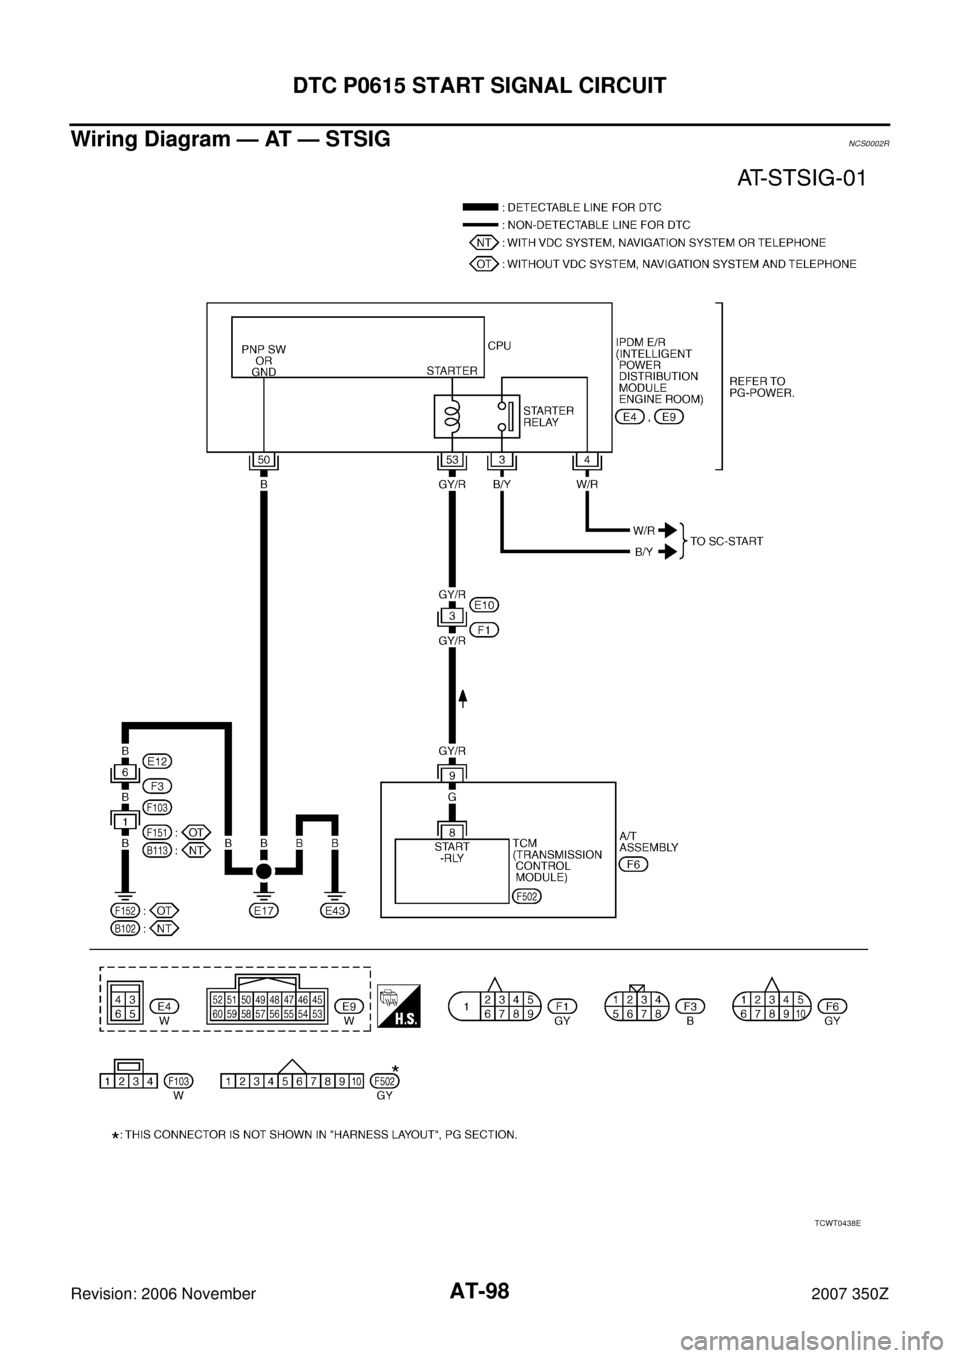 NISSAN 350Z 2007 Z33 Automatic Transmission Workshop Manual AT-98
DTC P0615 START SIGNAL CIRCUIT
Revision: 2006 November2007 350Z
Wiring Diagram — AT — STSIGNCS0002R
TCWT0438E 